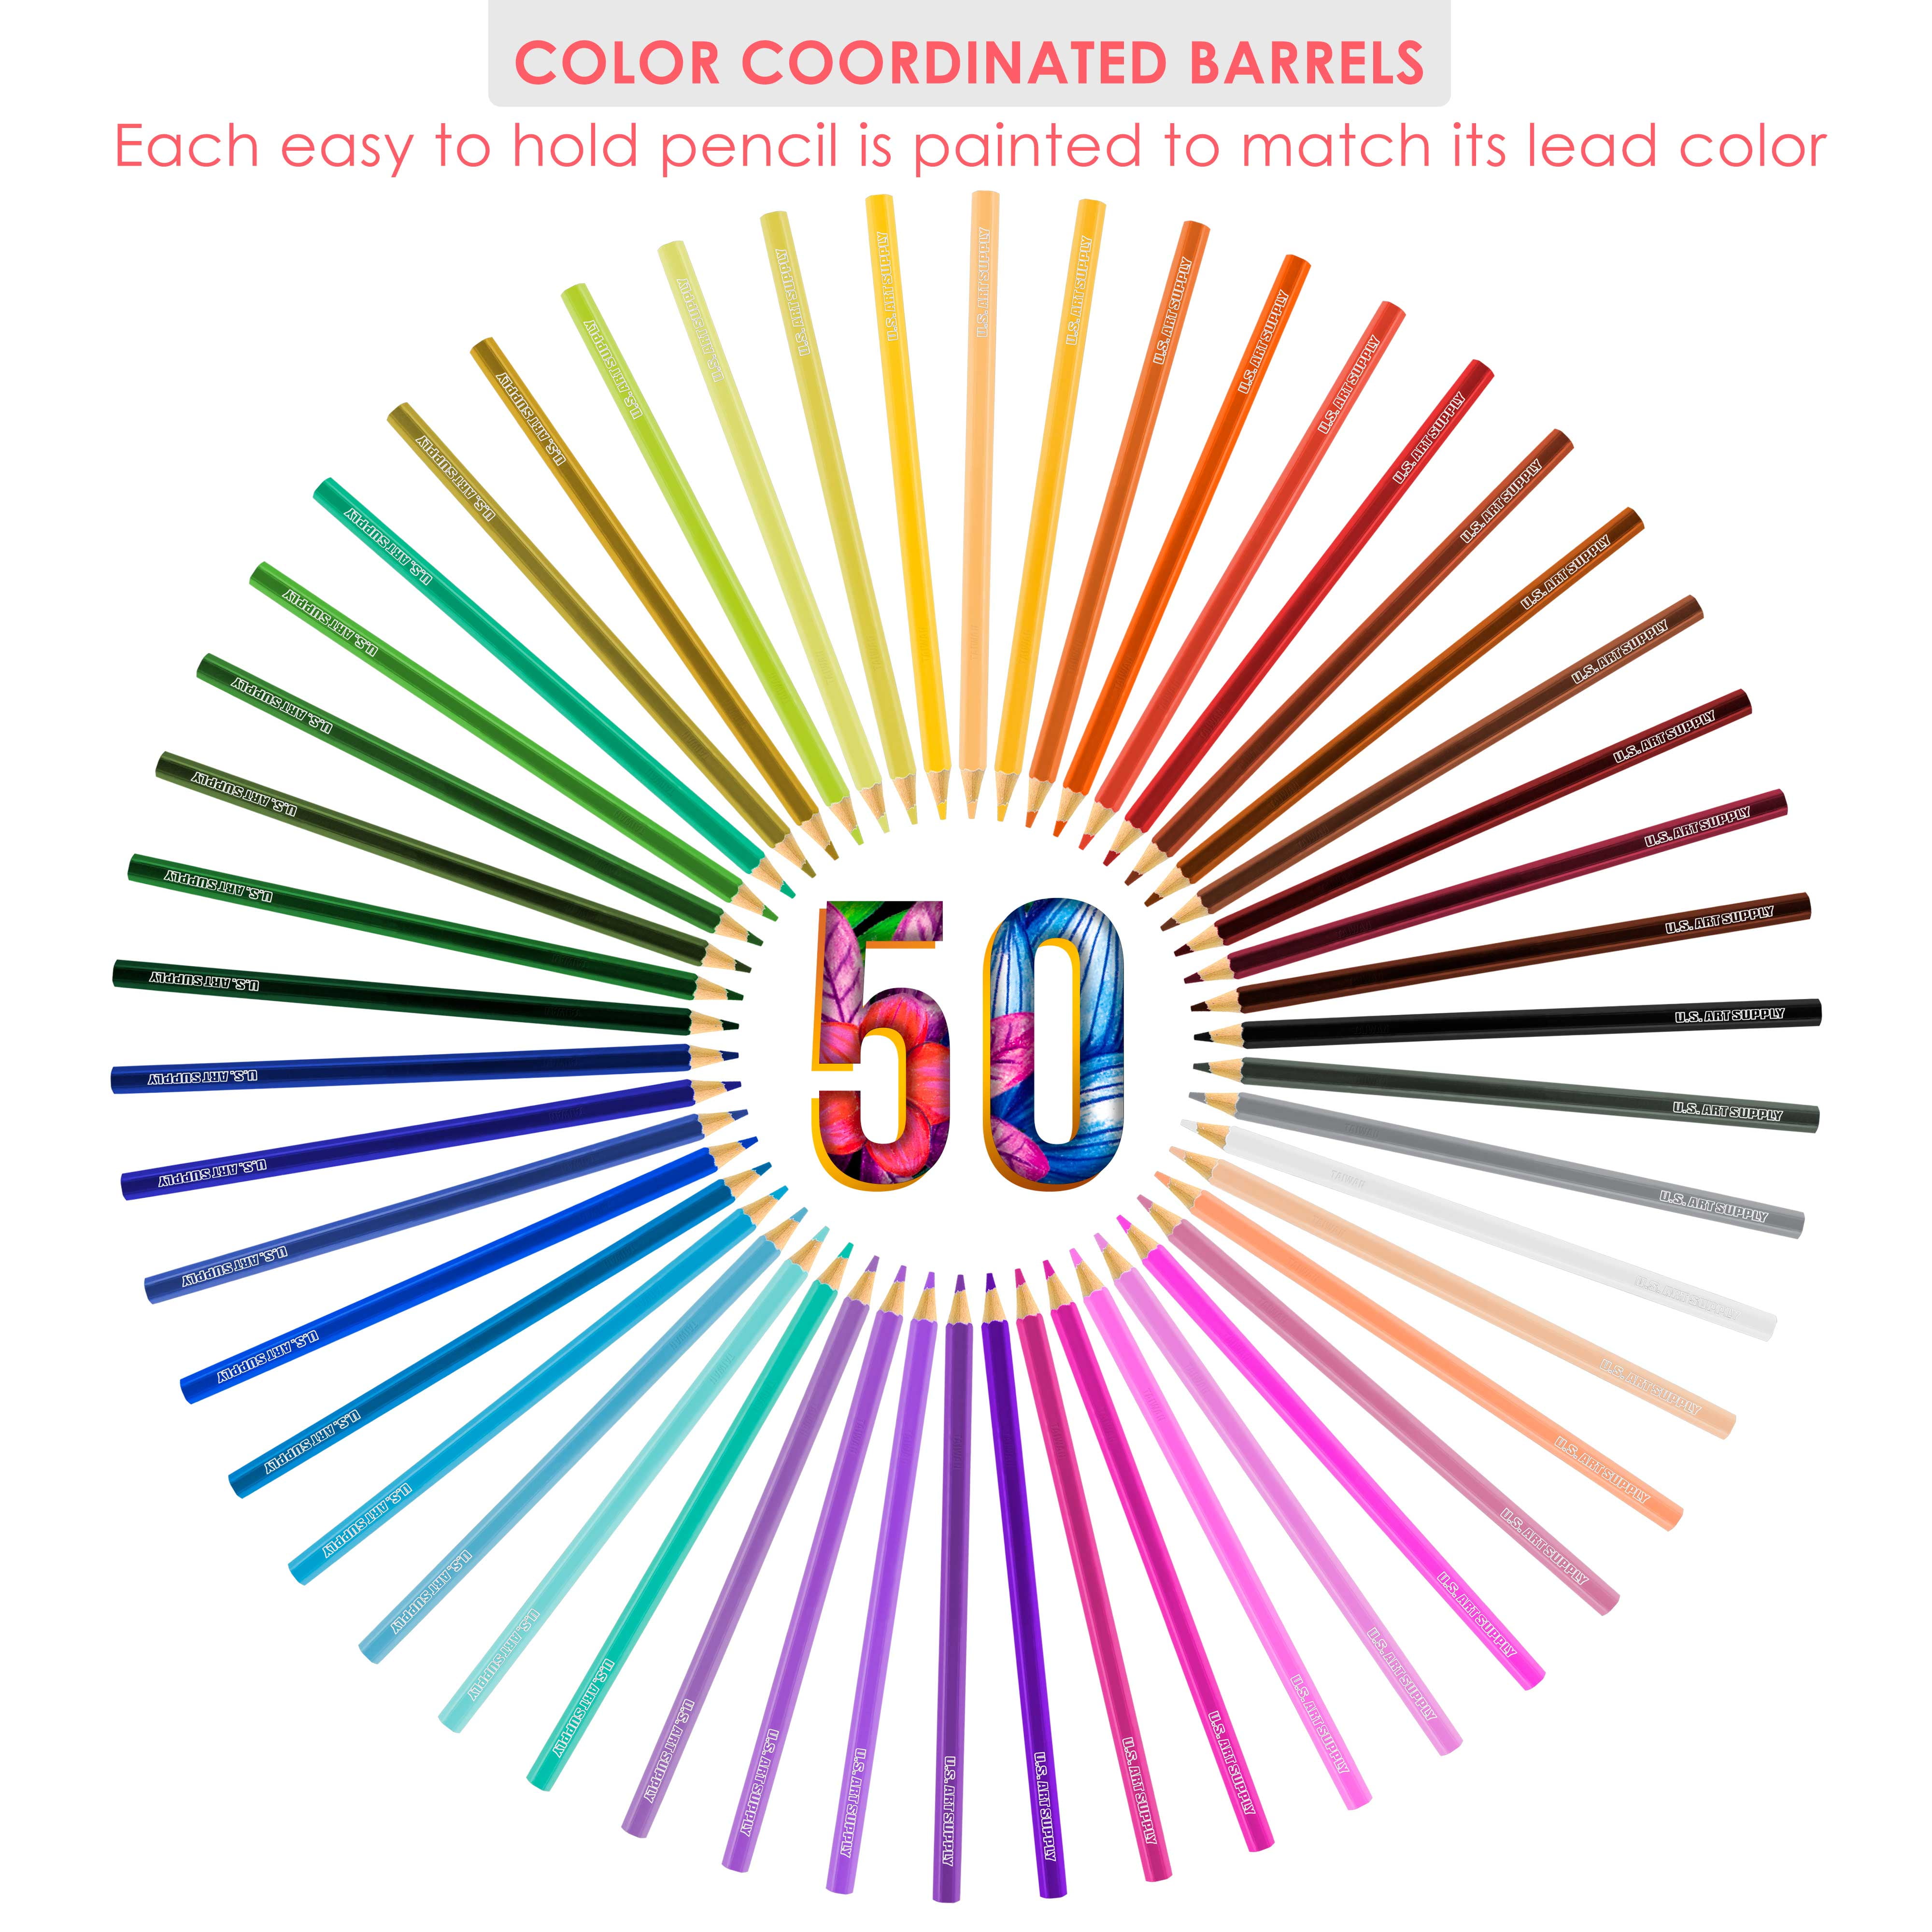  Huhuhero Colored Pencils for Adult Coloring Books, Set of 120  Colors, Soft Core Artist Drawing Pencils, Ideal Coloring Pencils for  Sketching Shading, Art Supplies Gifts for Adults Kids Teens 